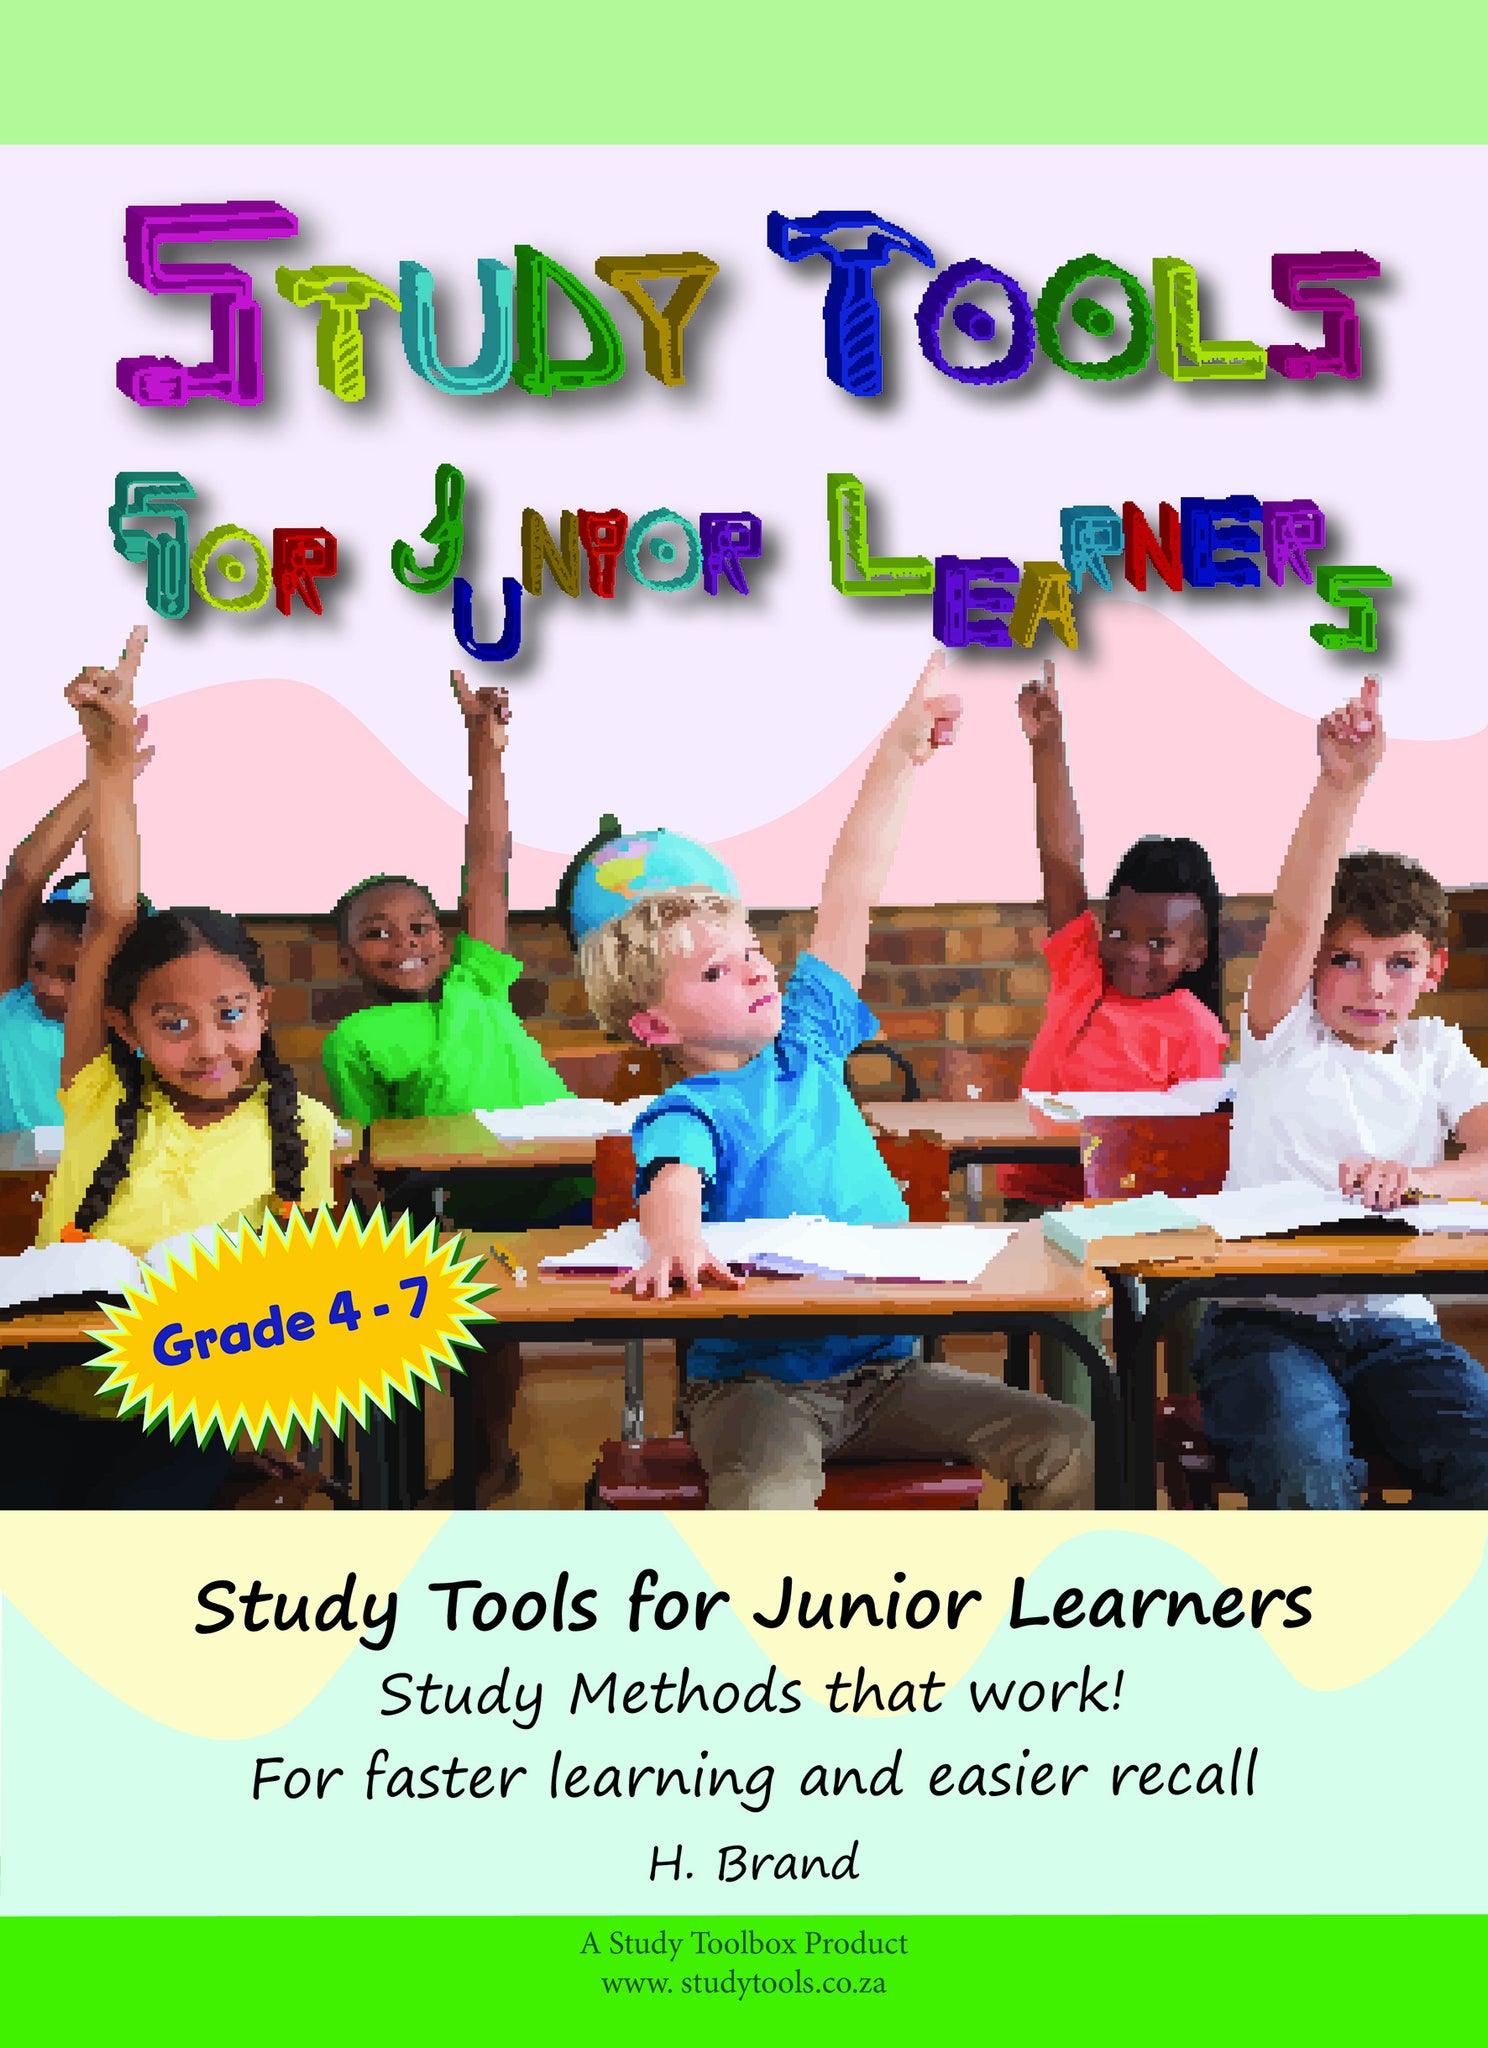 Study Tools for Junior Learners (English) - Study Toolbox